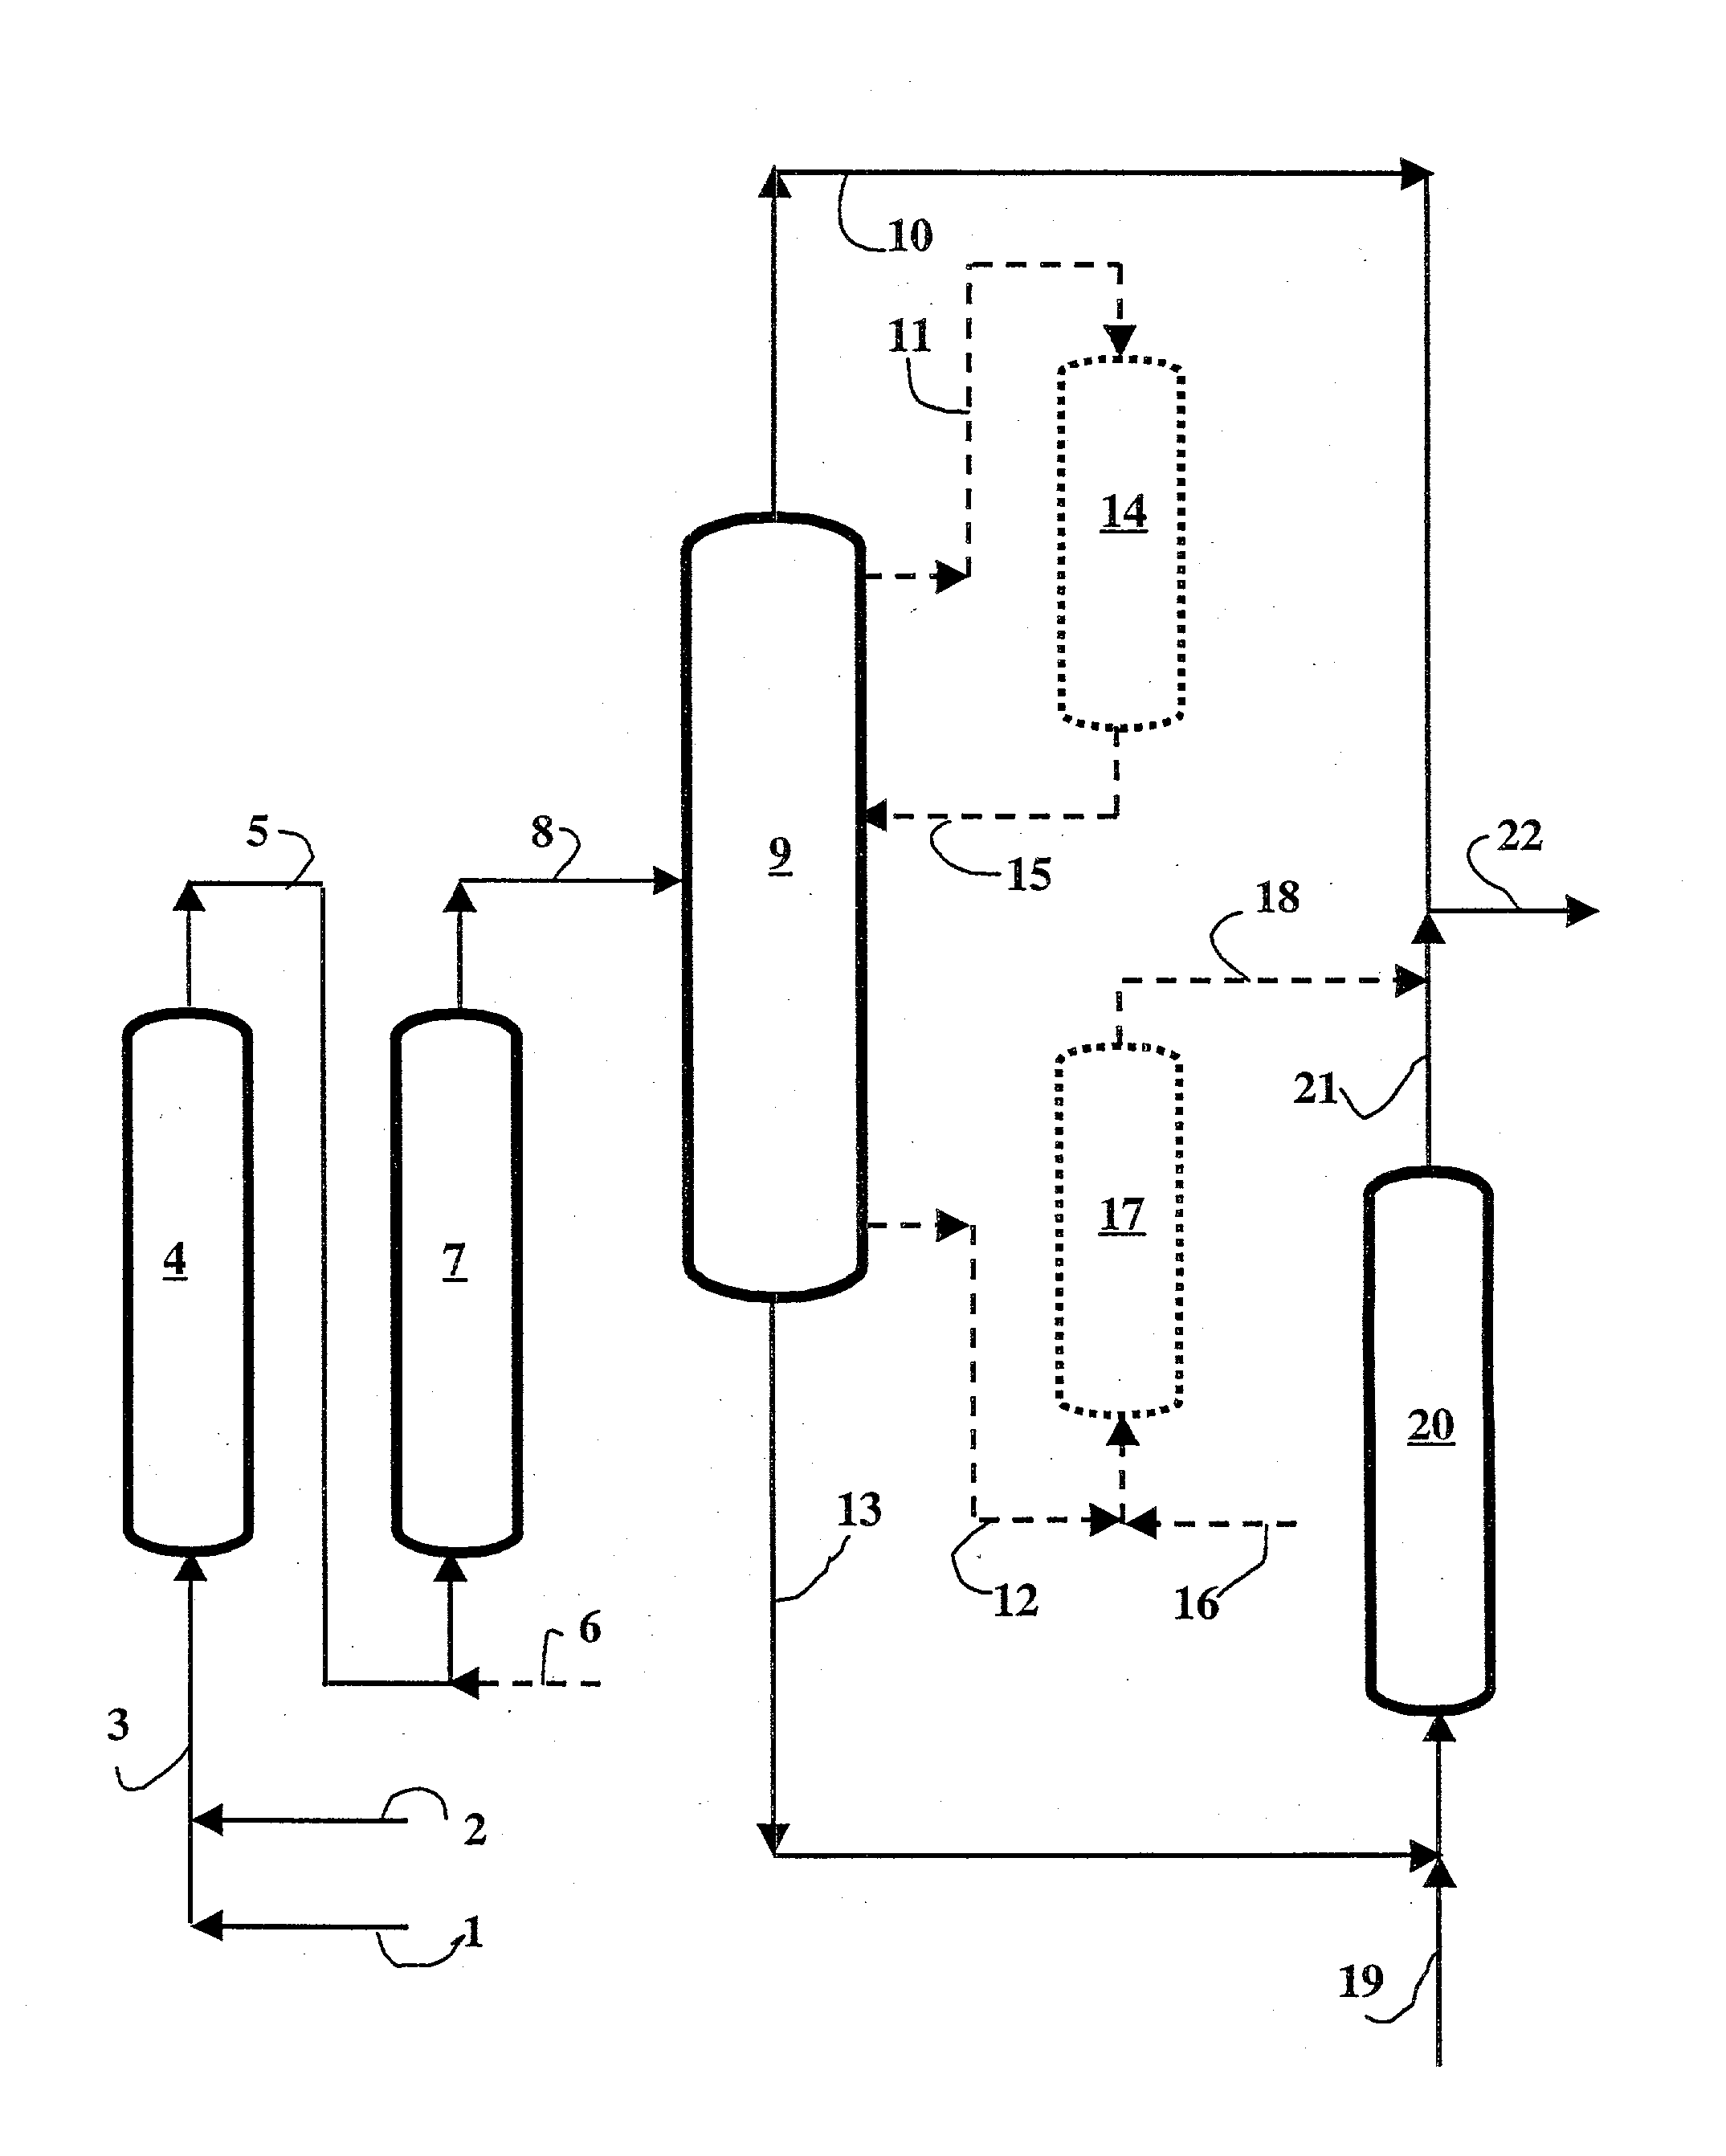 Process for the production of gasoline with a low sulfur content comprising a hydrogenation, a fractionation, a stage for transformation of sulfur-containing compounds and a desulfurization